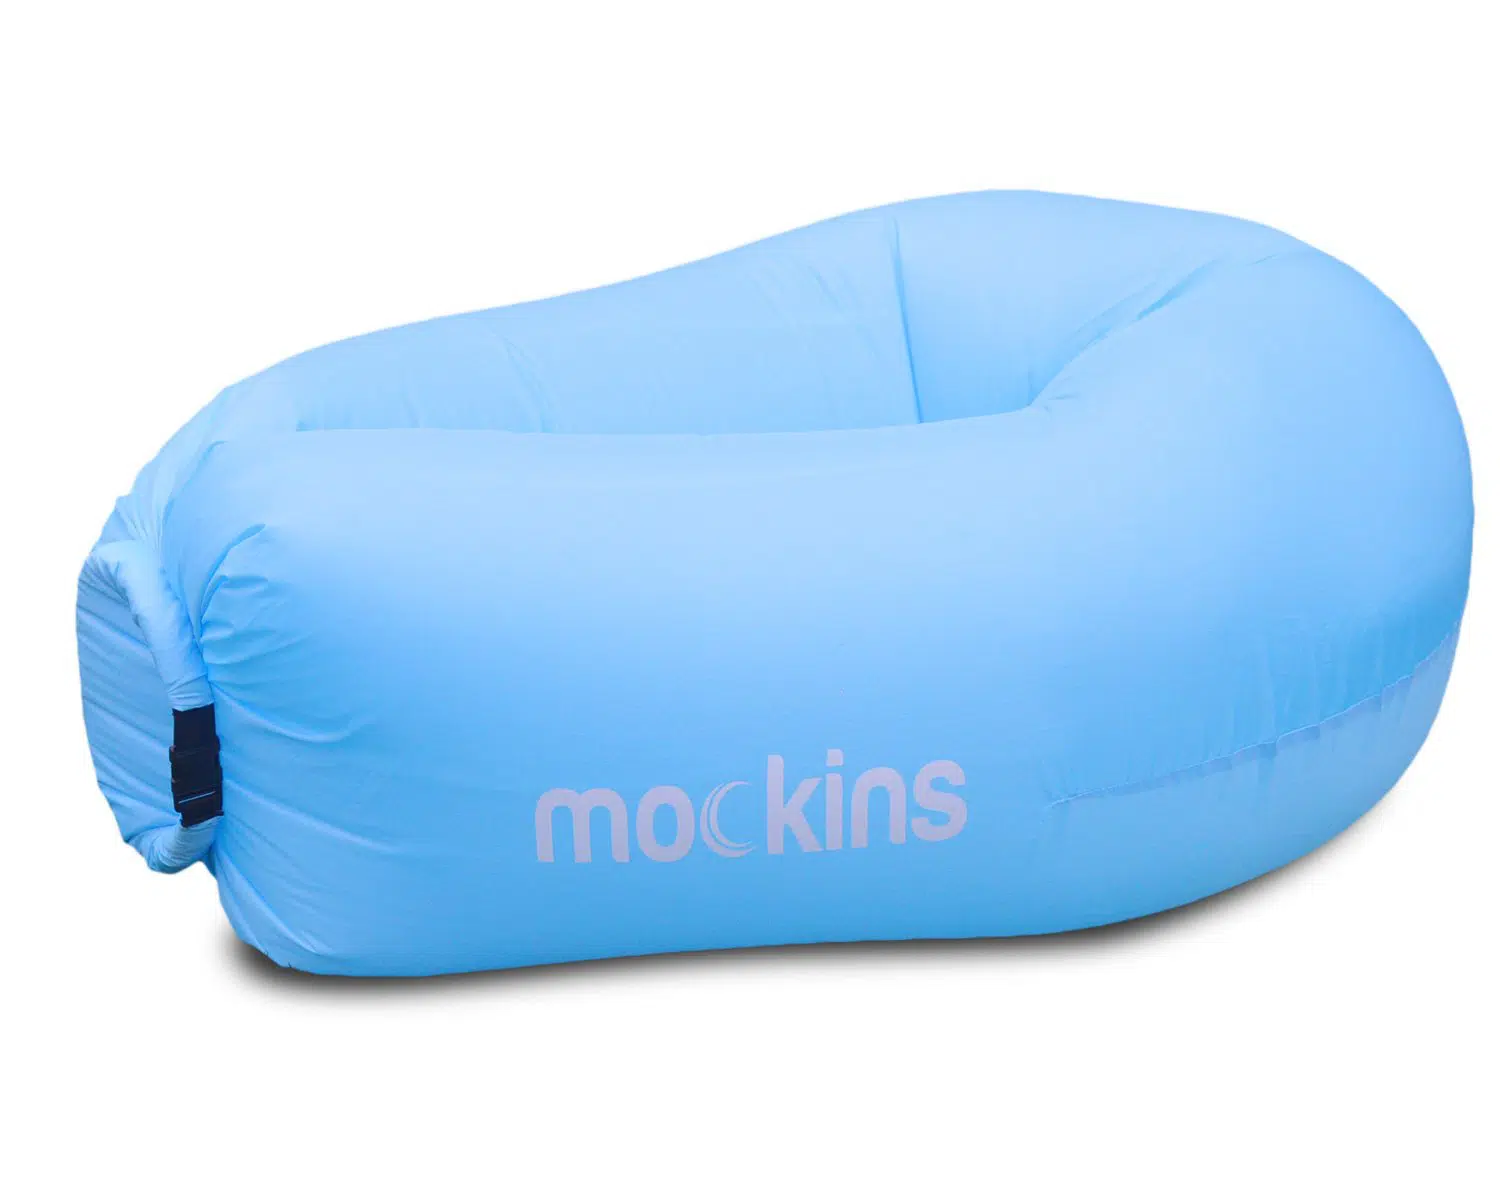 mockins-best-inflatable-chair-kids